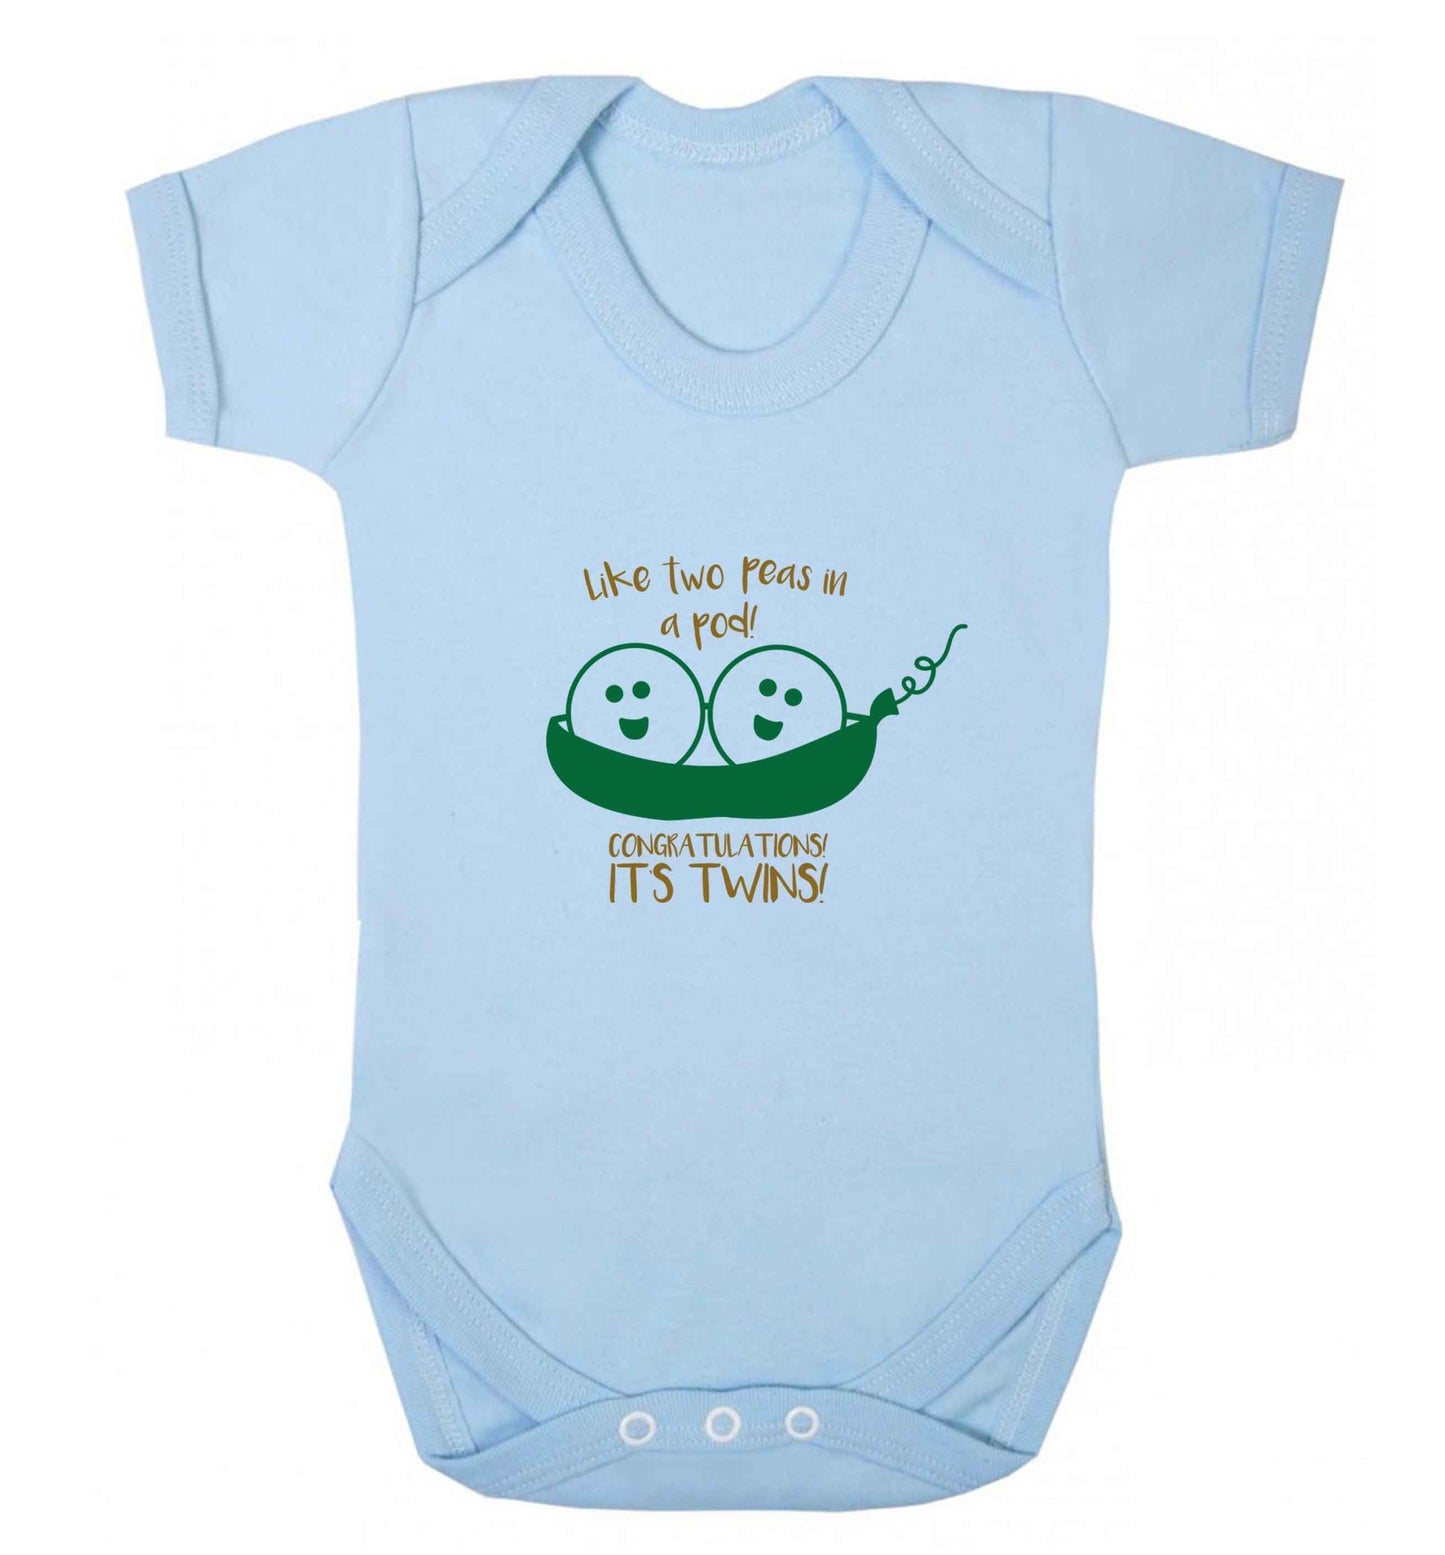 Like two peas in a pod! Congratulations it's twins! baby vest pale blue 18-24 months